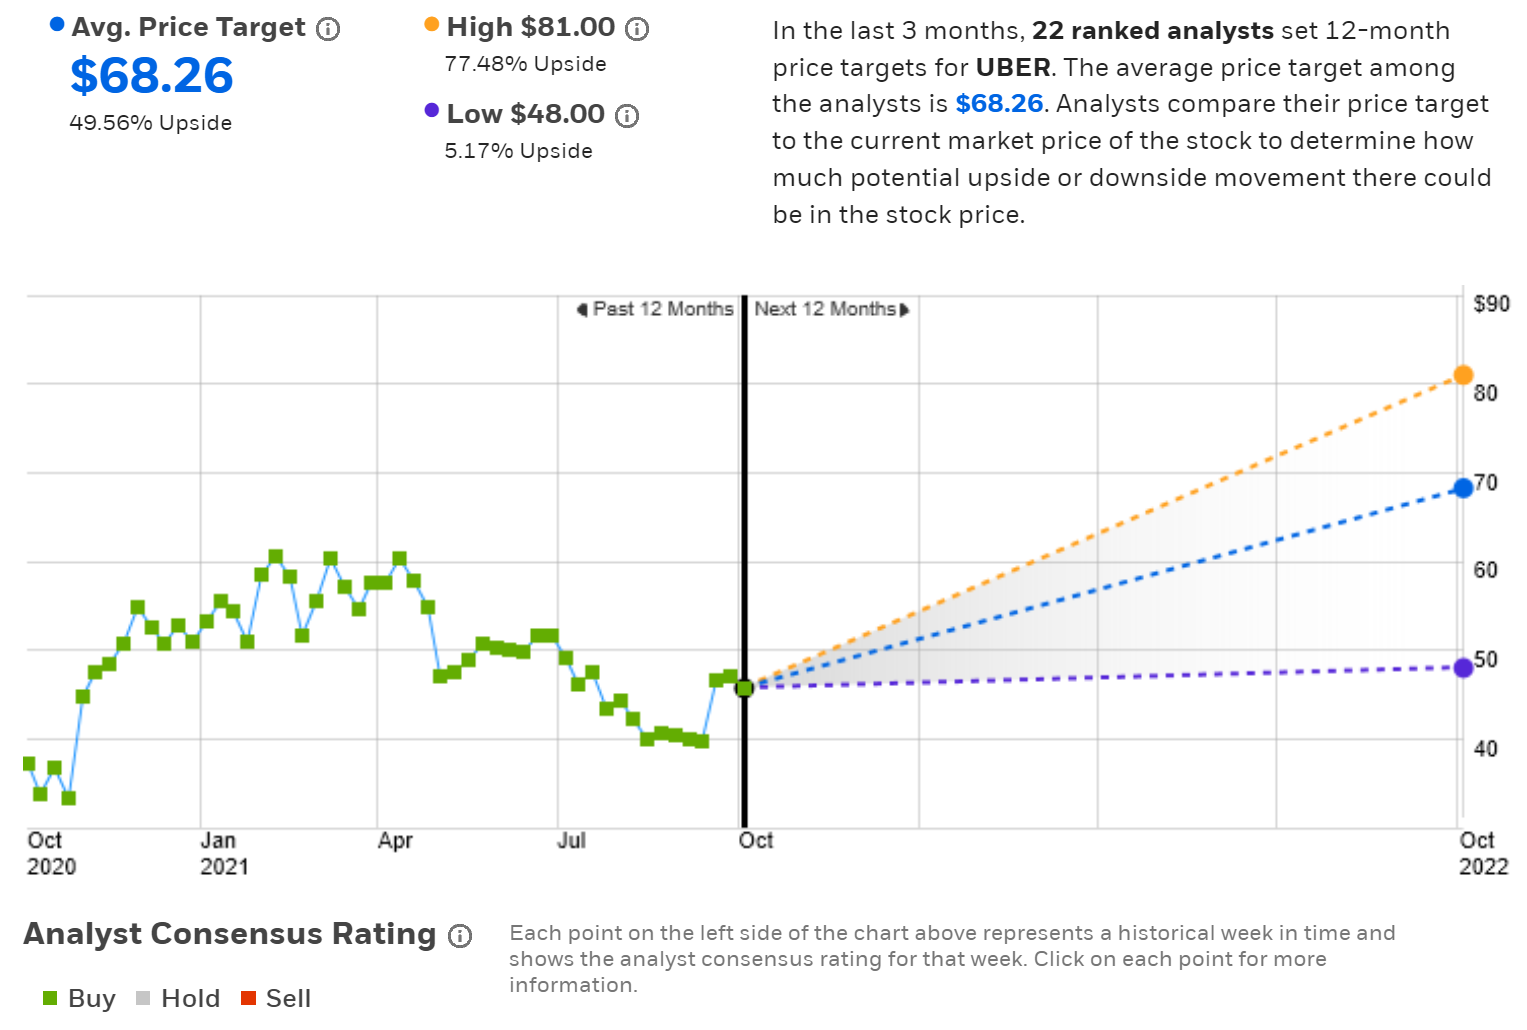 UBER Analyst Consensus Rating And Price Target